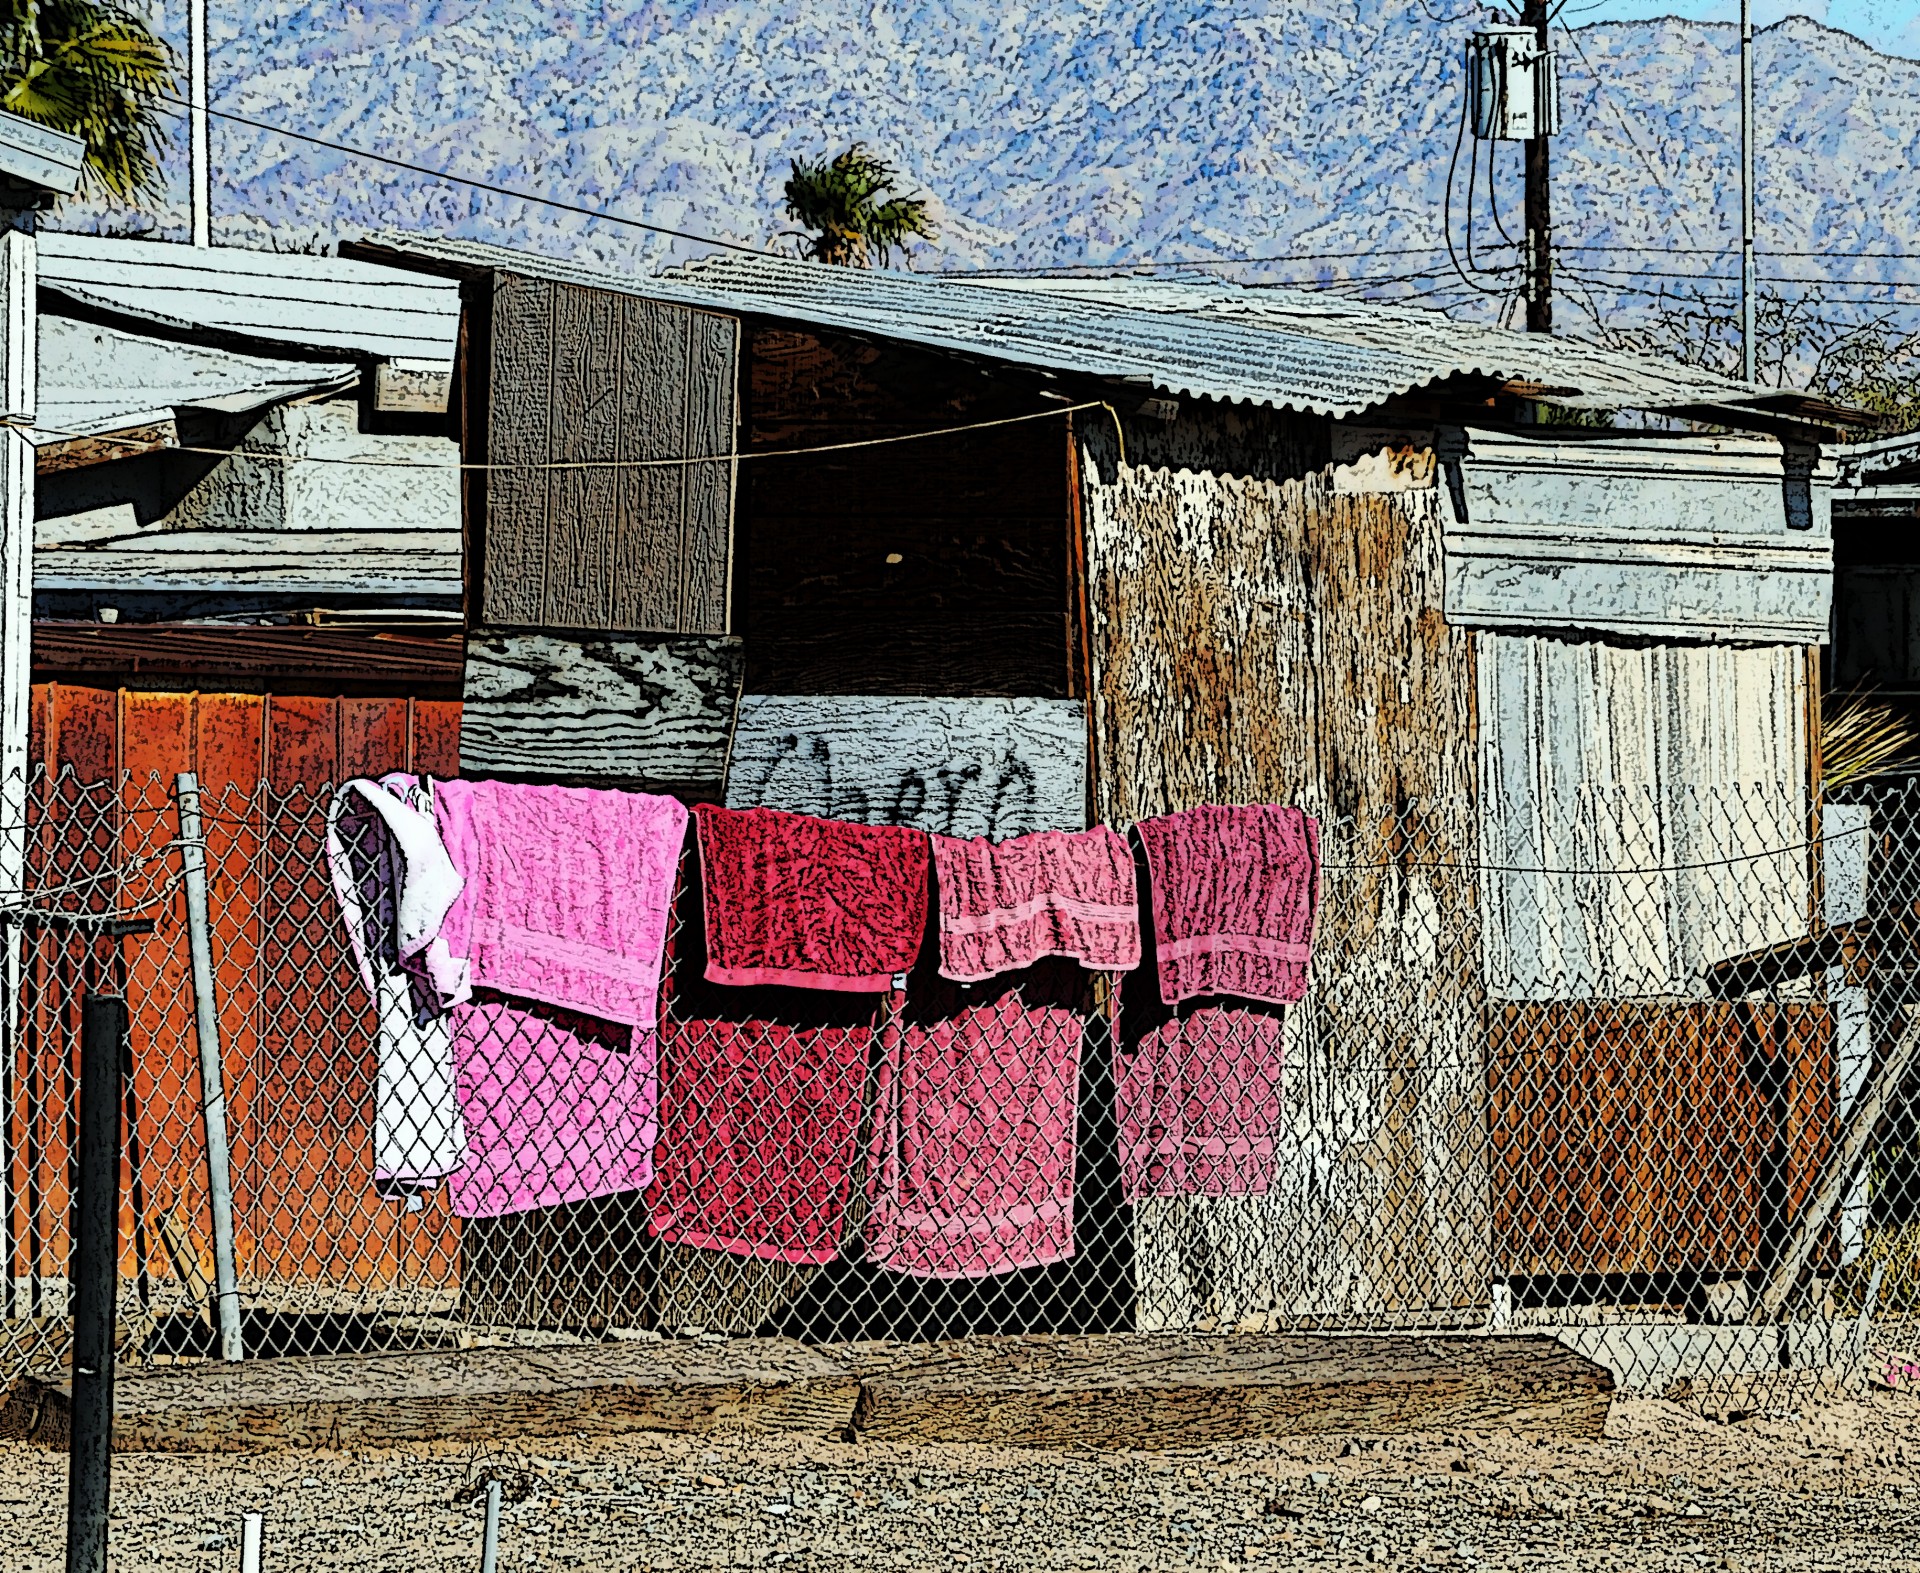 4 towels in different shakes of pink hang to dry on a chain link fence that surrounds a home that is nearly in ruins.  Taken at Bombay Beach, California. Artistic effect applied